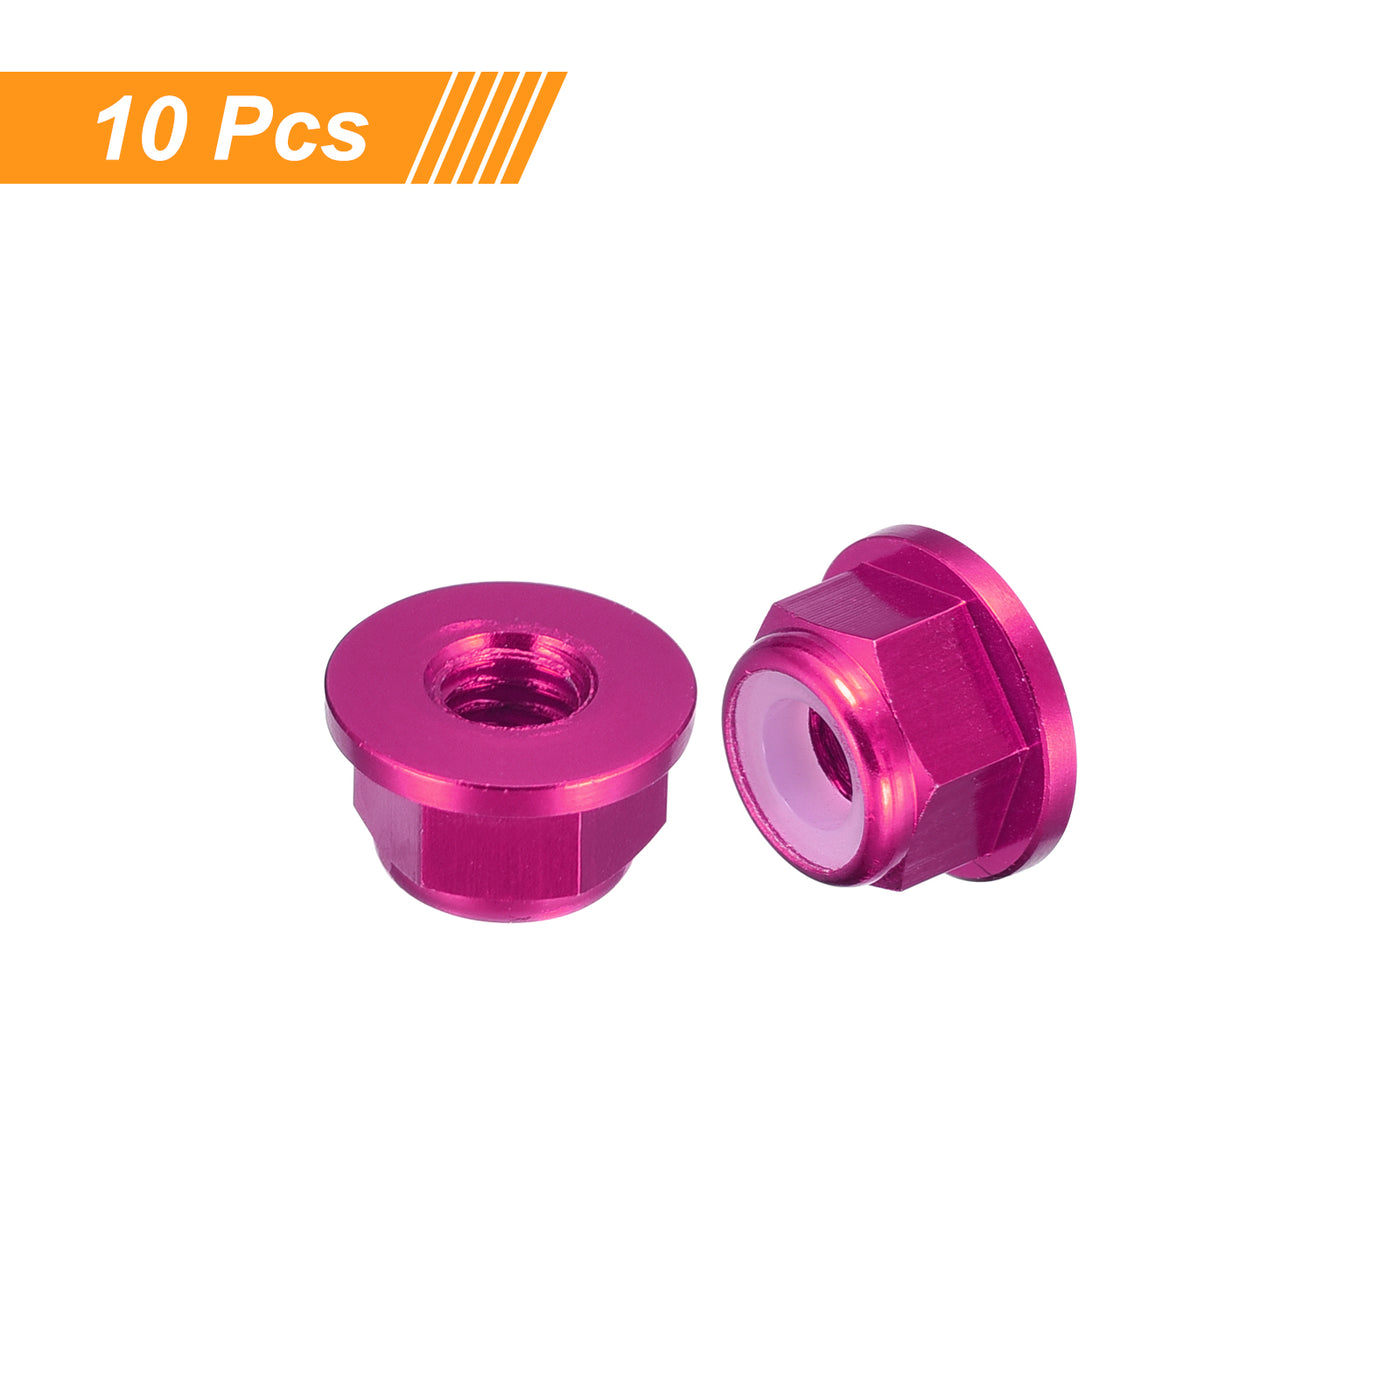 uxcell Uxcell Nylon Insert Hex Lock Nuts, 10pcs - M4 x 0.7mm Aluminum Alloy Self-Locking Nut, Anodizing Flange Lock Nut for Fasteners (Pink)